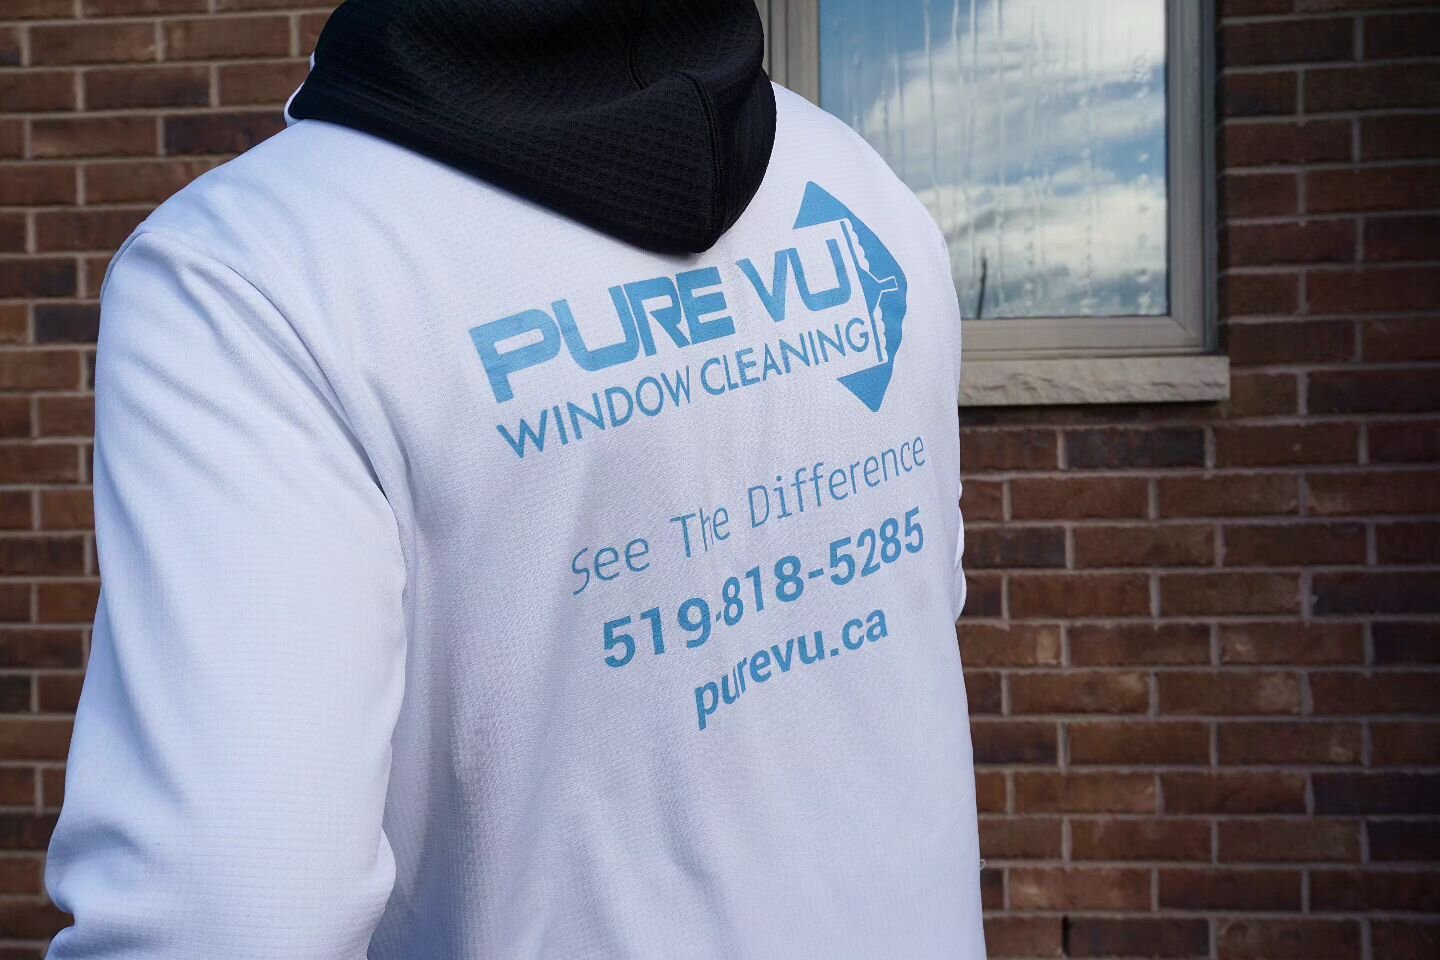 We're now taking bookings for our spring schedule! ☀️ Just give us a call or email our office at info@purevu.ca to reserve your spot.

#windsorontario #windsorbusiness #yqg #yqgbusiness #shopyqg